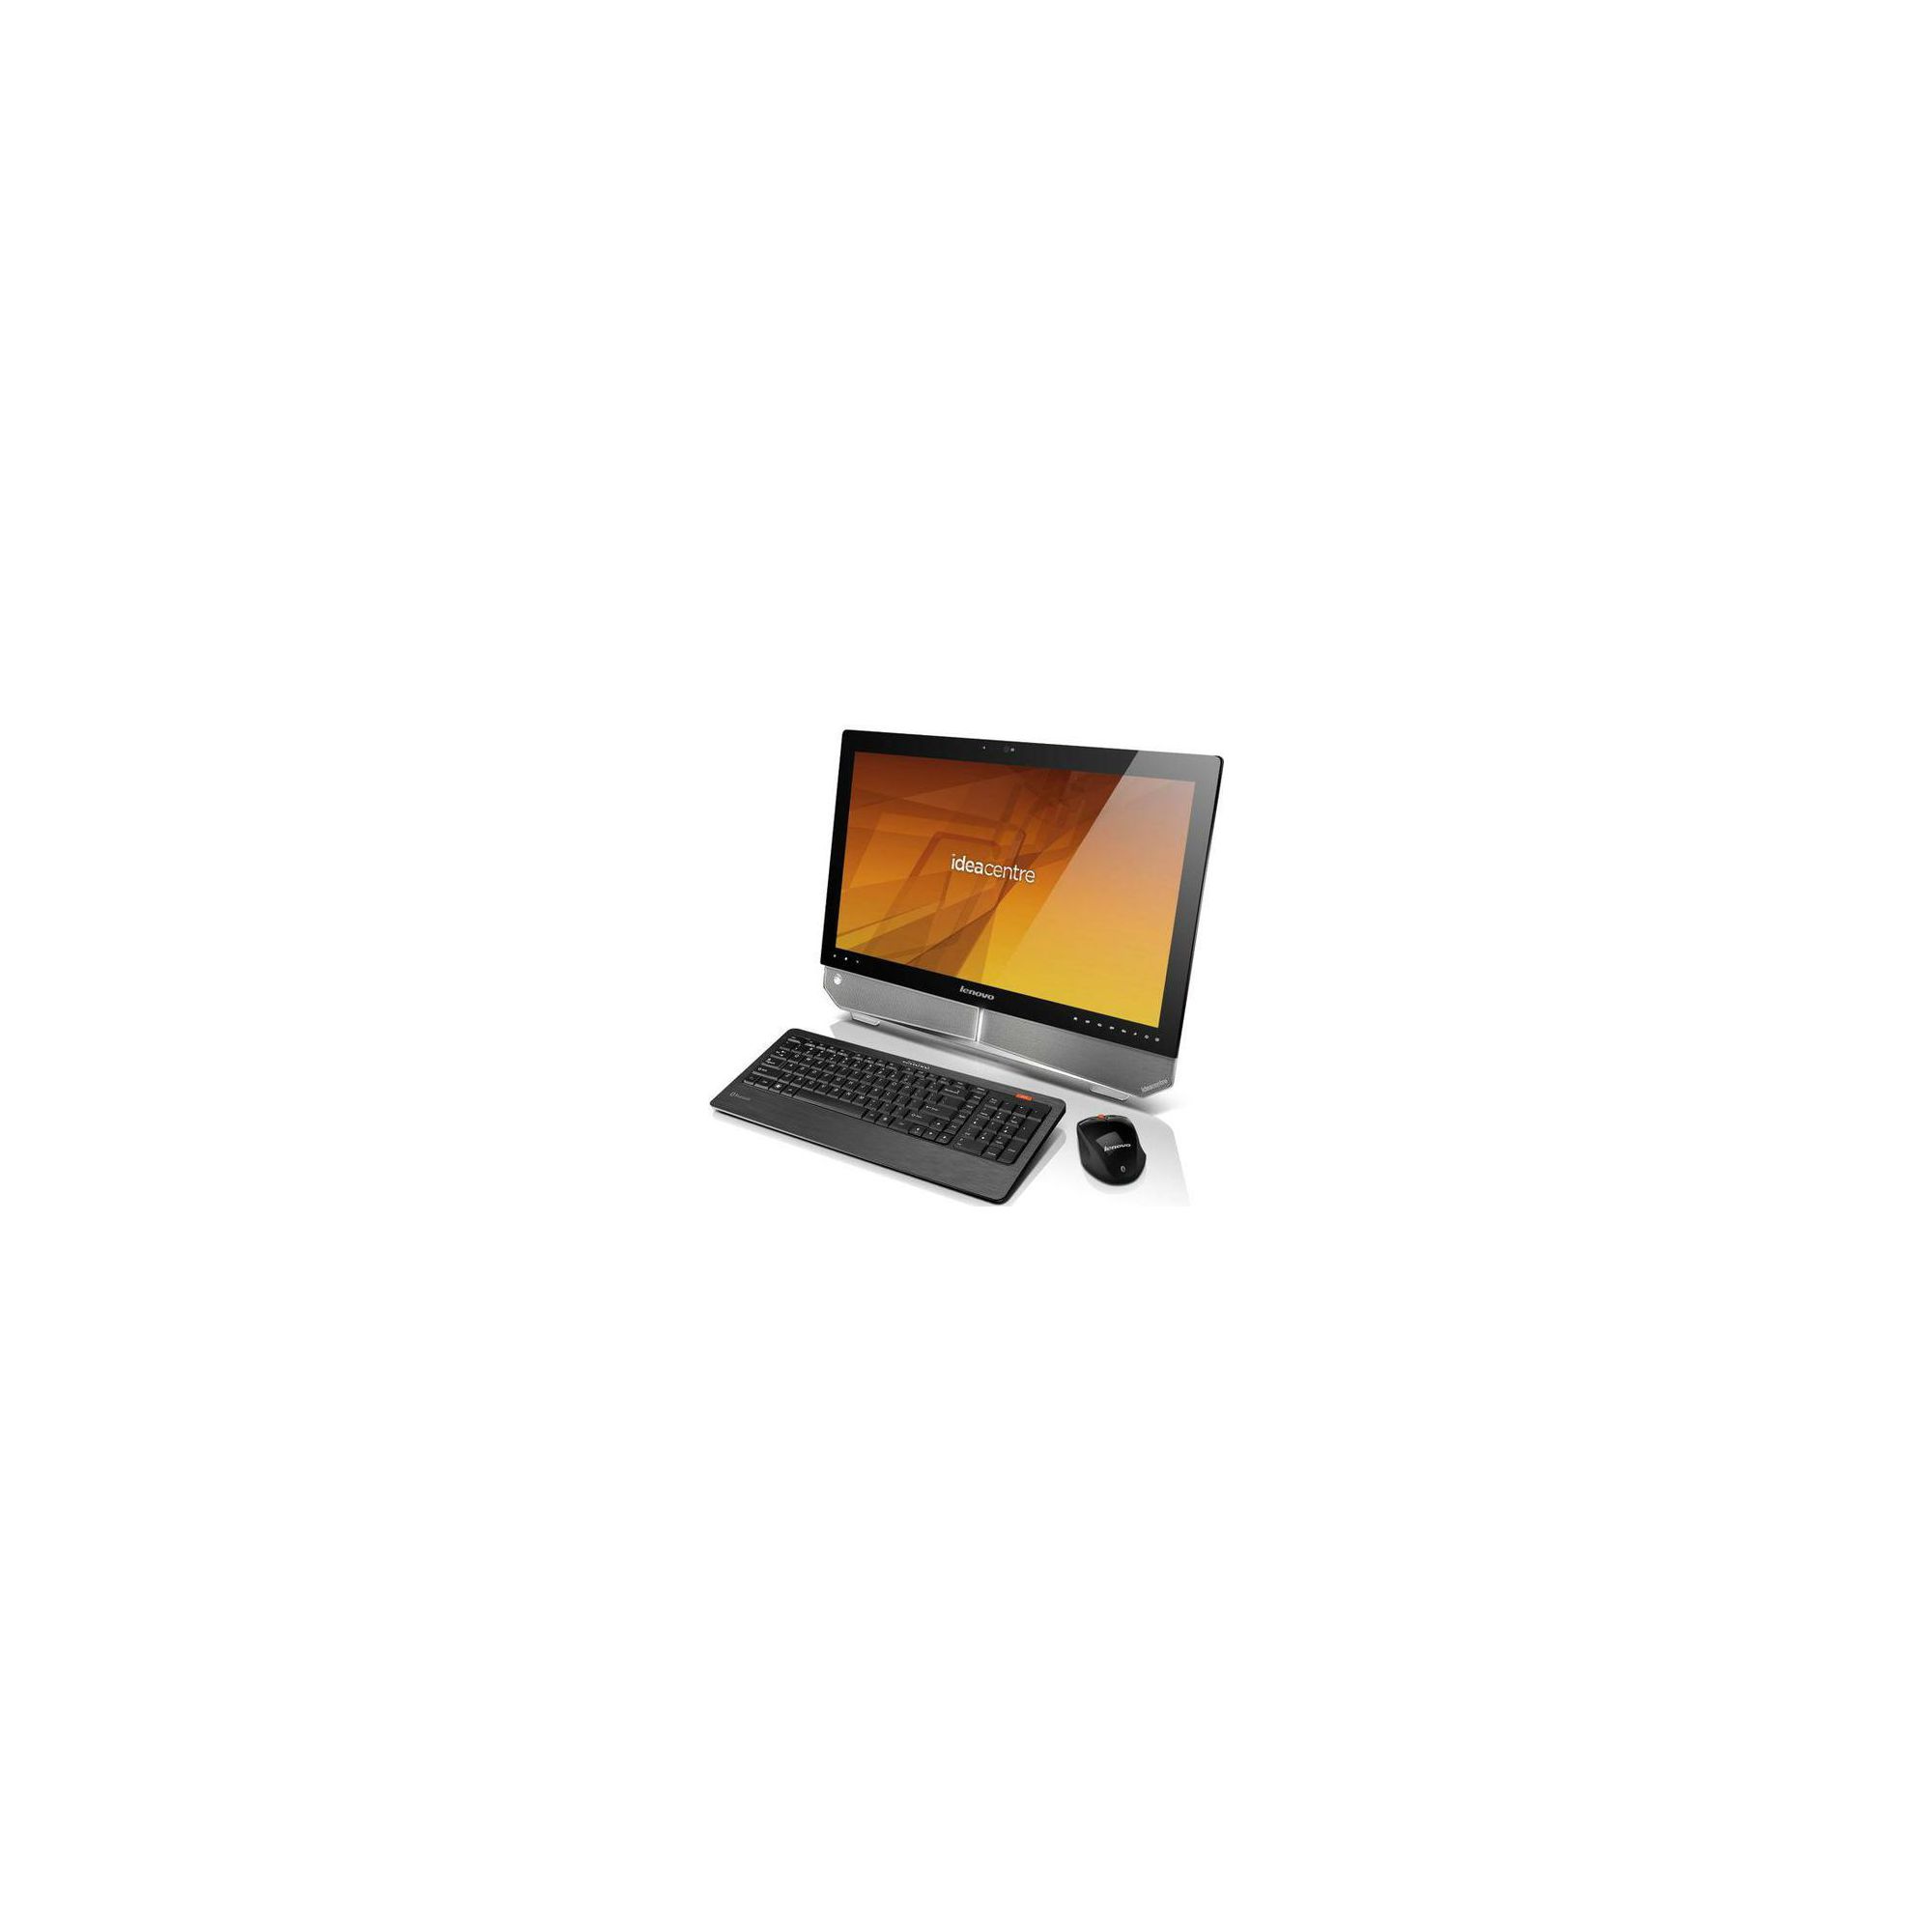 Lenovo VBT1CUK IdeaCentre B520 Multi touch All-in-One Desktop PC at Tesco Direct